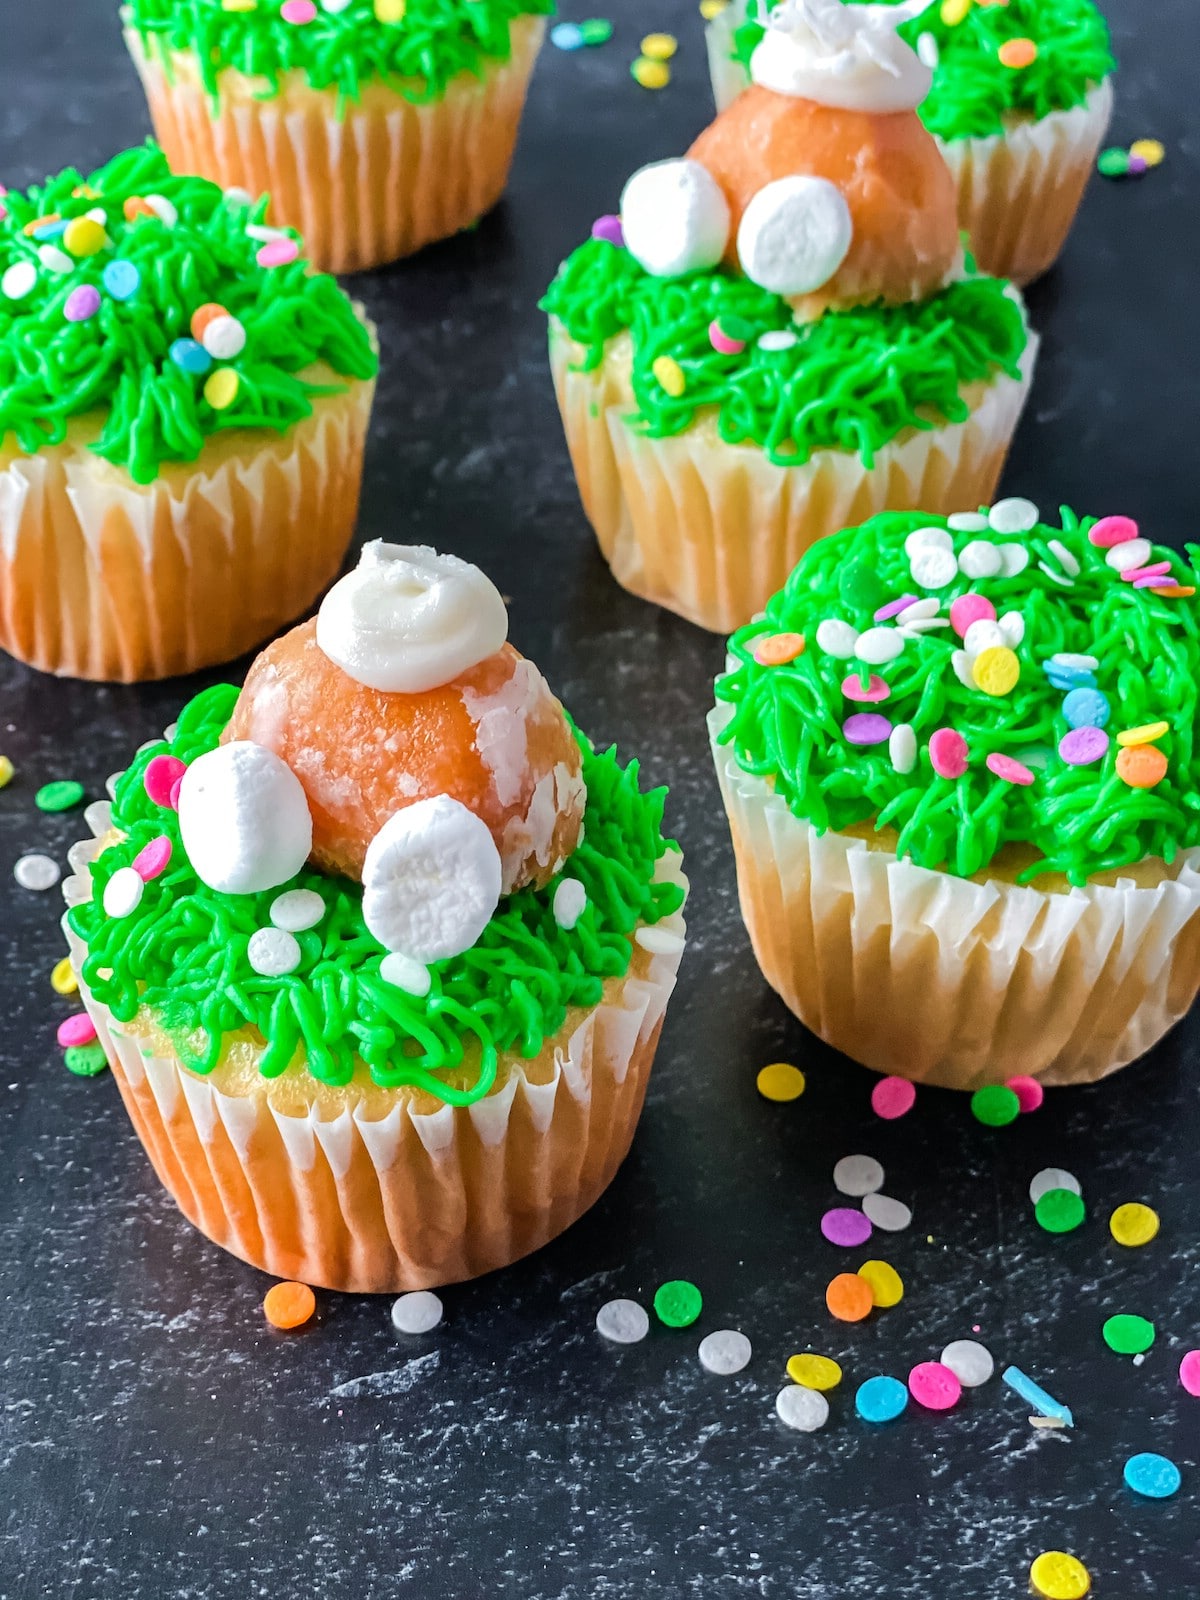 Vanilla cupcake with green icing and donut hole bunny butt